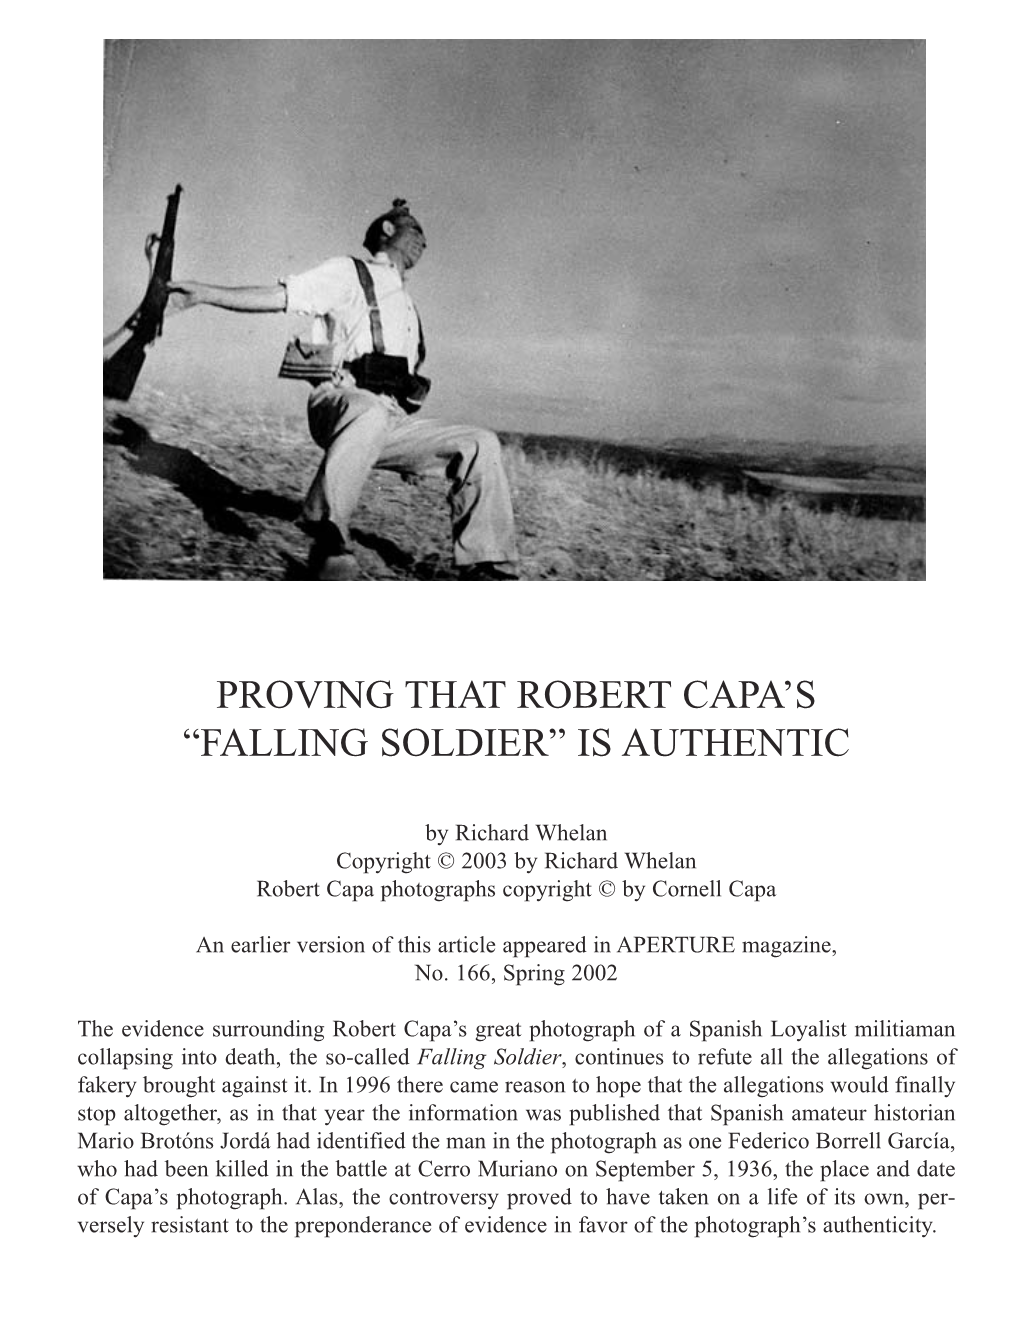 Proving That Robert Capa's “Falling Soldier” Is Authentic